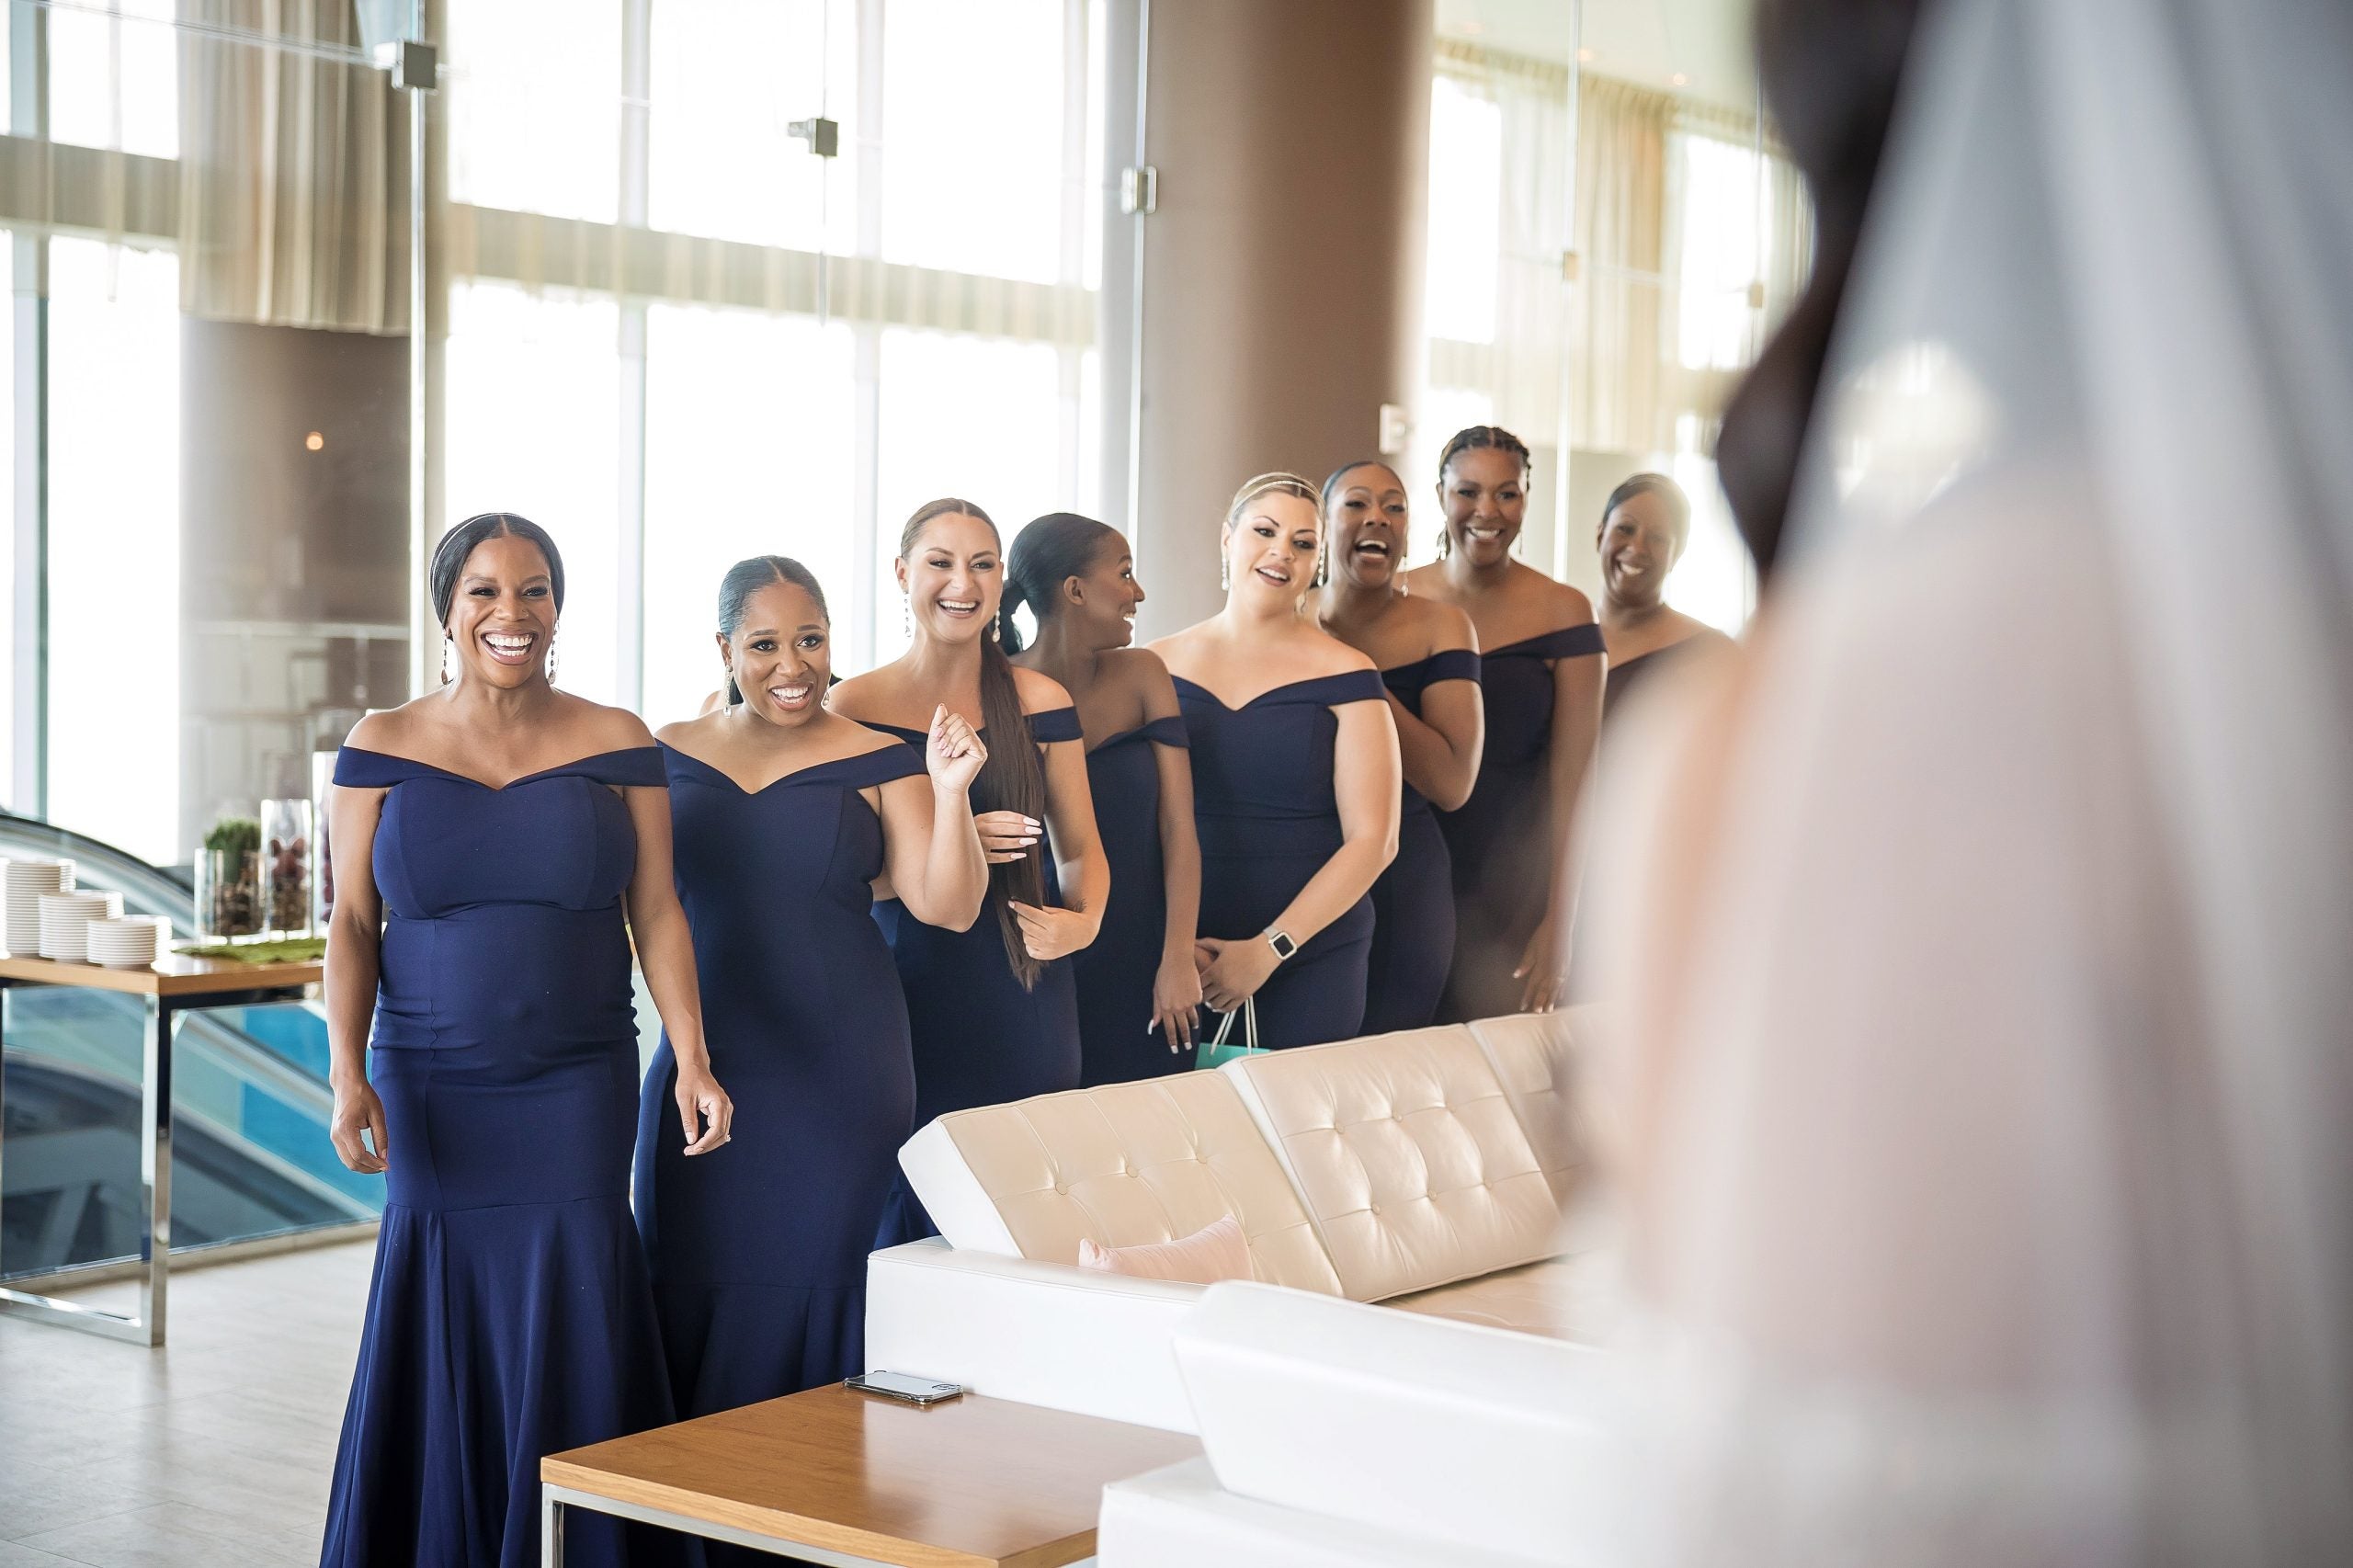 Bridal Bliss: Candice And Evan's Oceanside Wedding In Atlantic City Was A "Dream" Come True